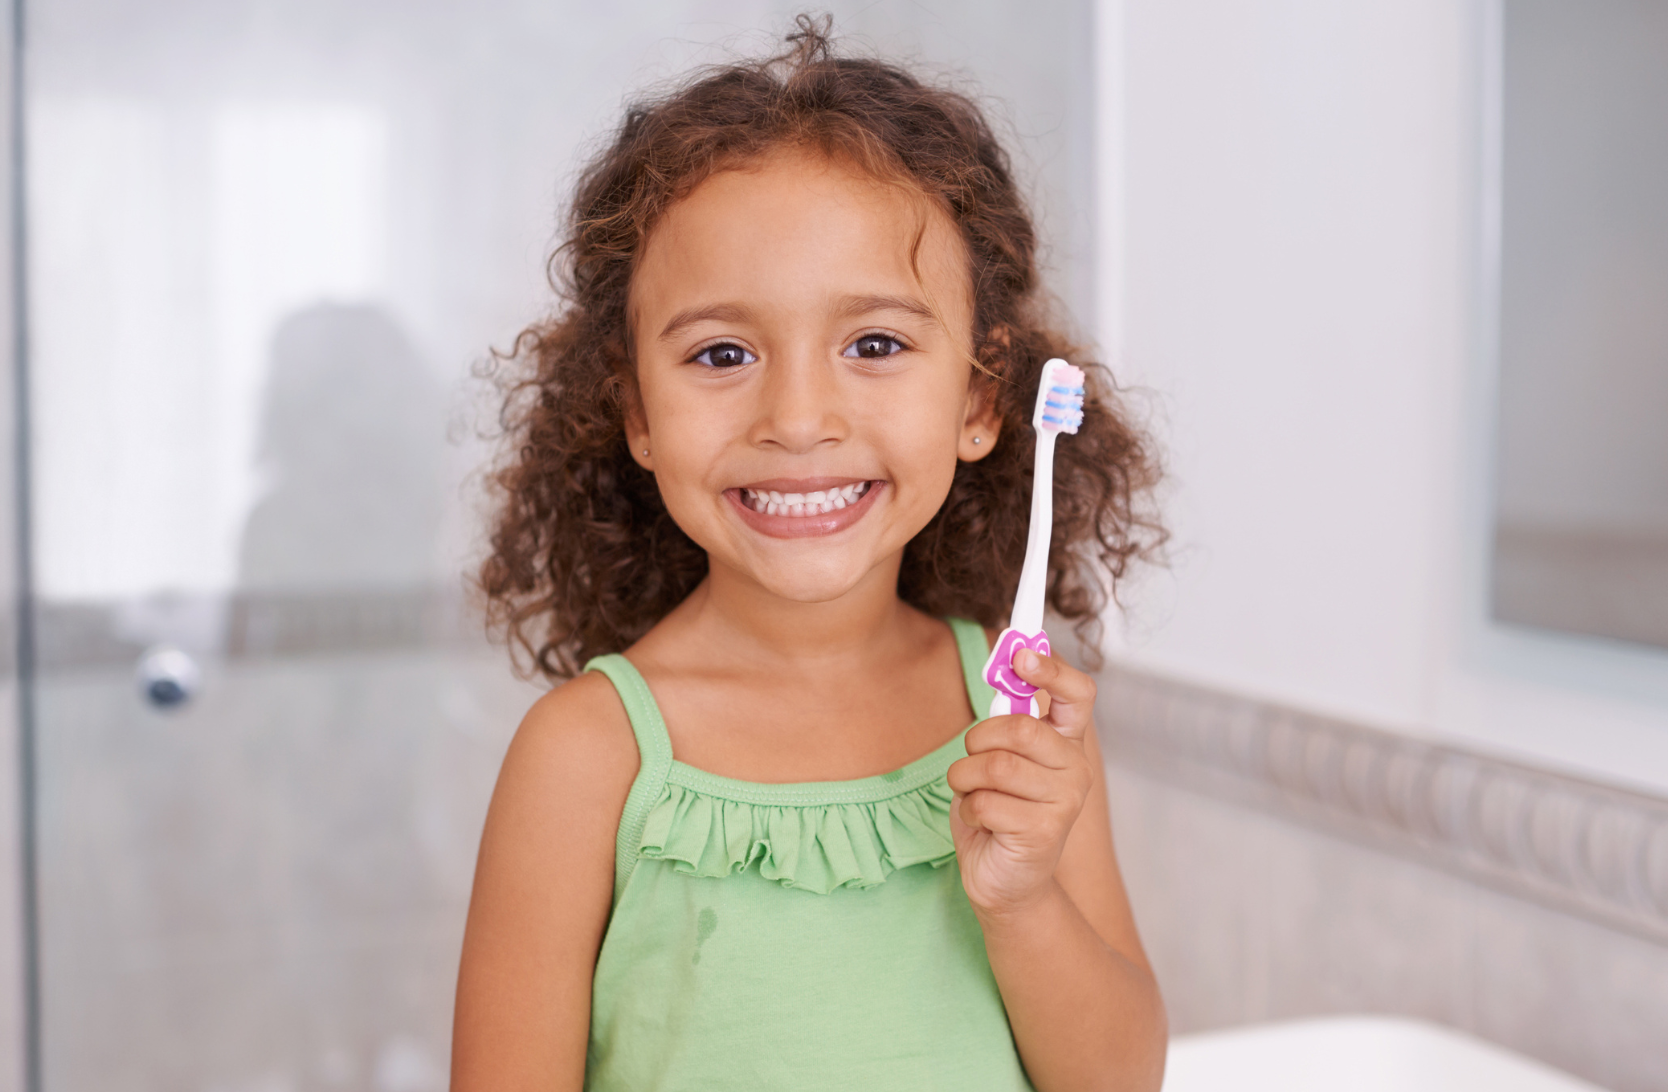 Girl smiling and holding up a toothbrush